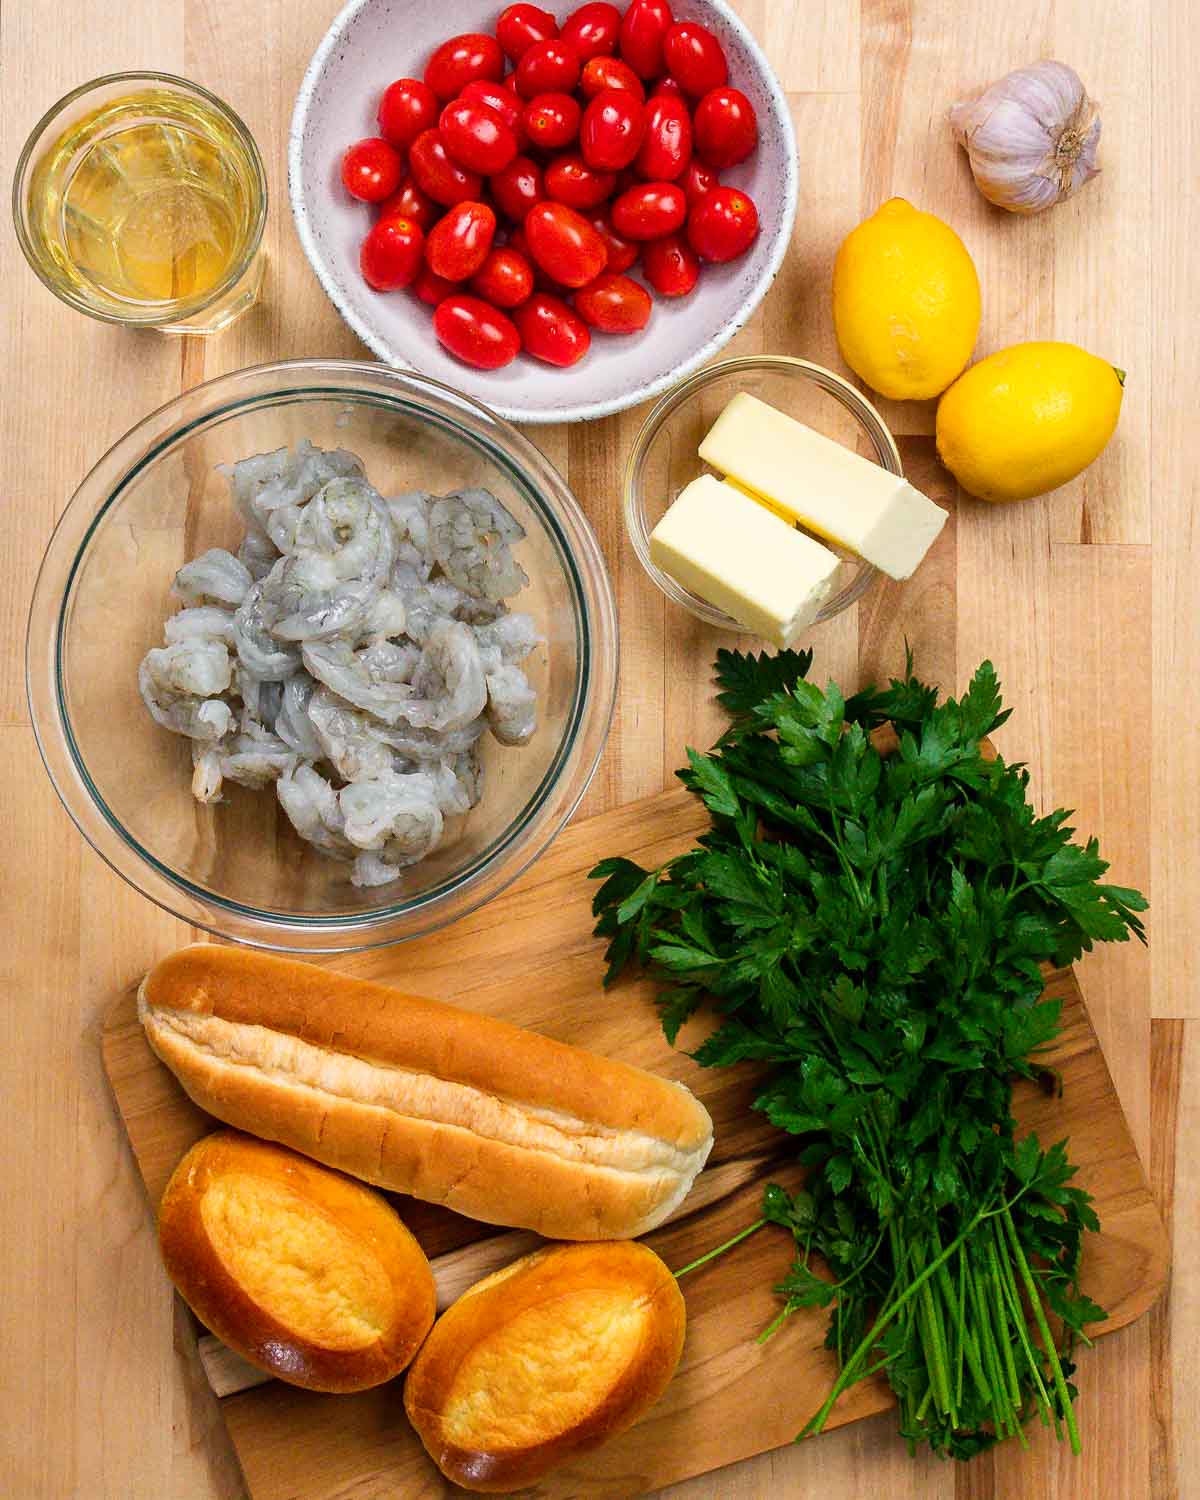 Ingredients shown: white wine, tomatoes, garlic, lemon, butter, shrimp, rolls, and parsley.